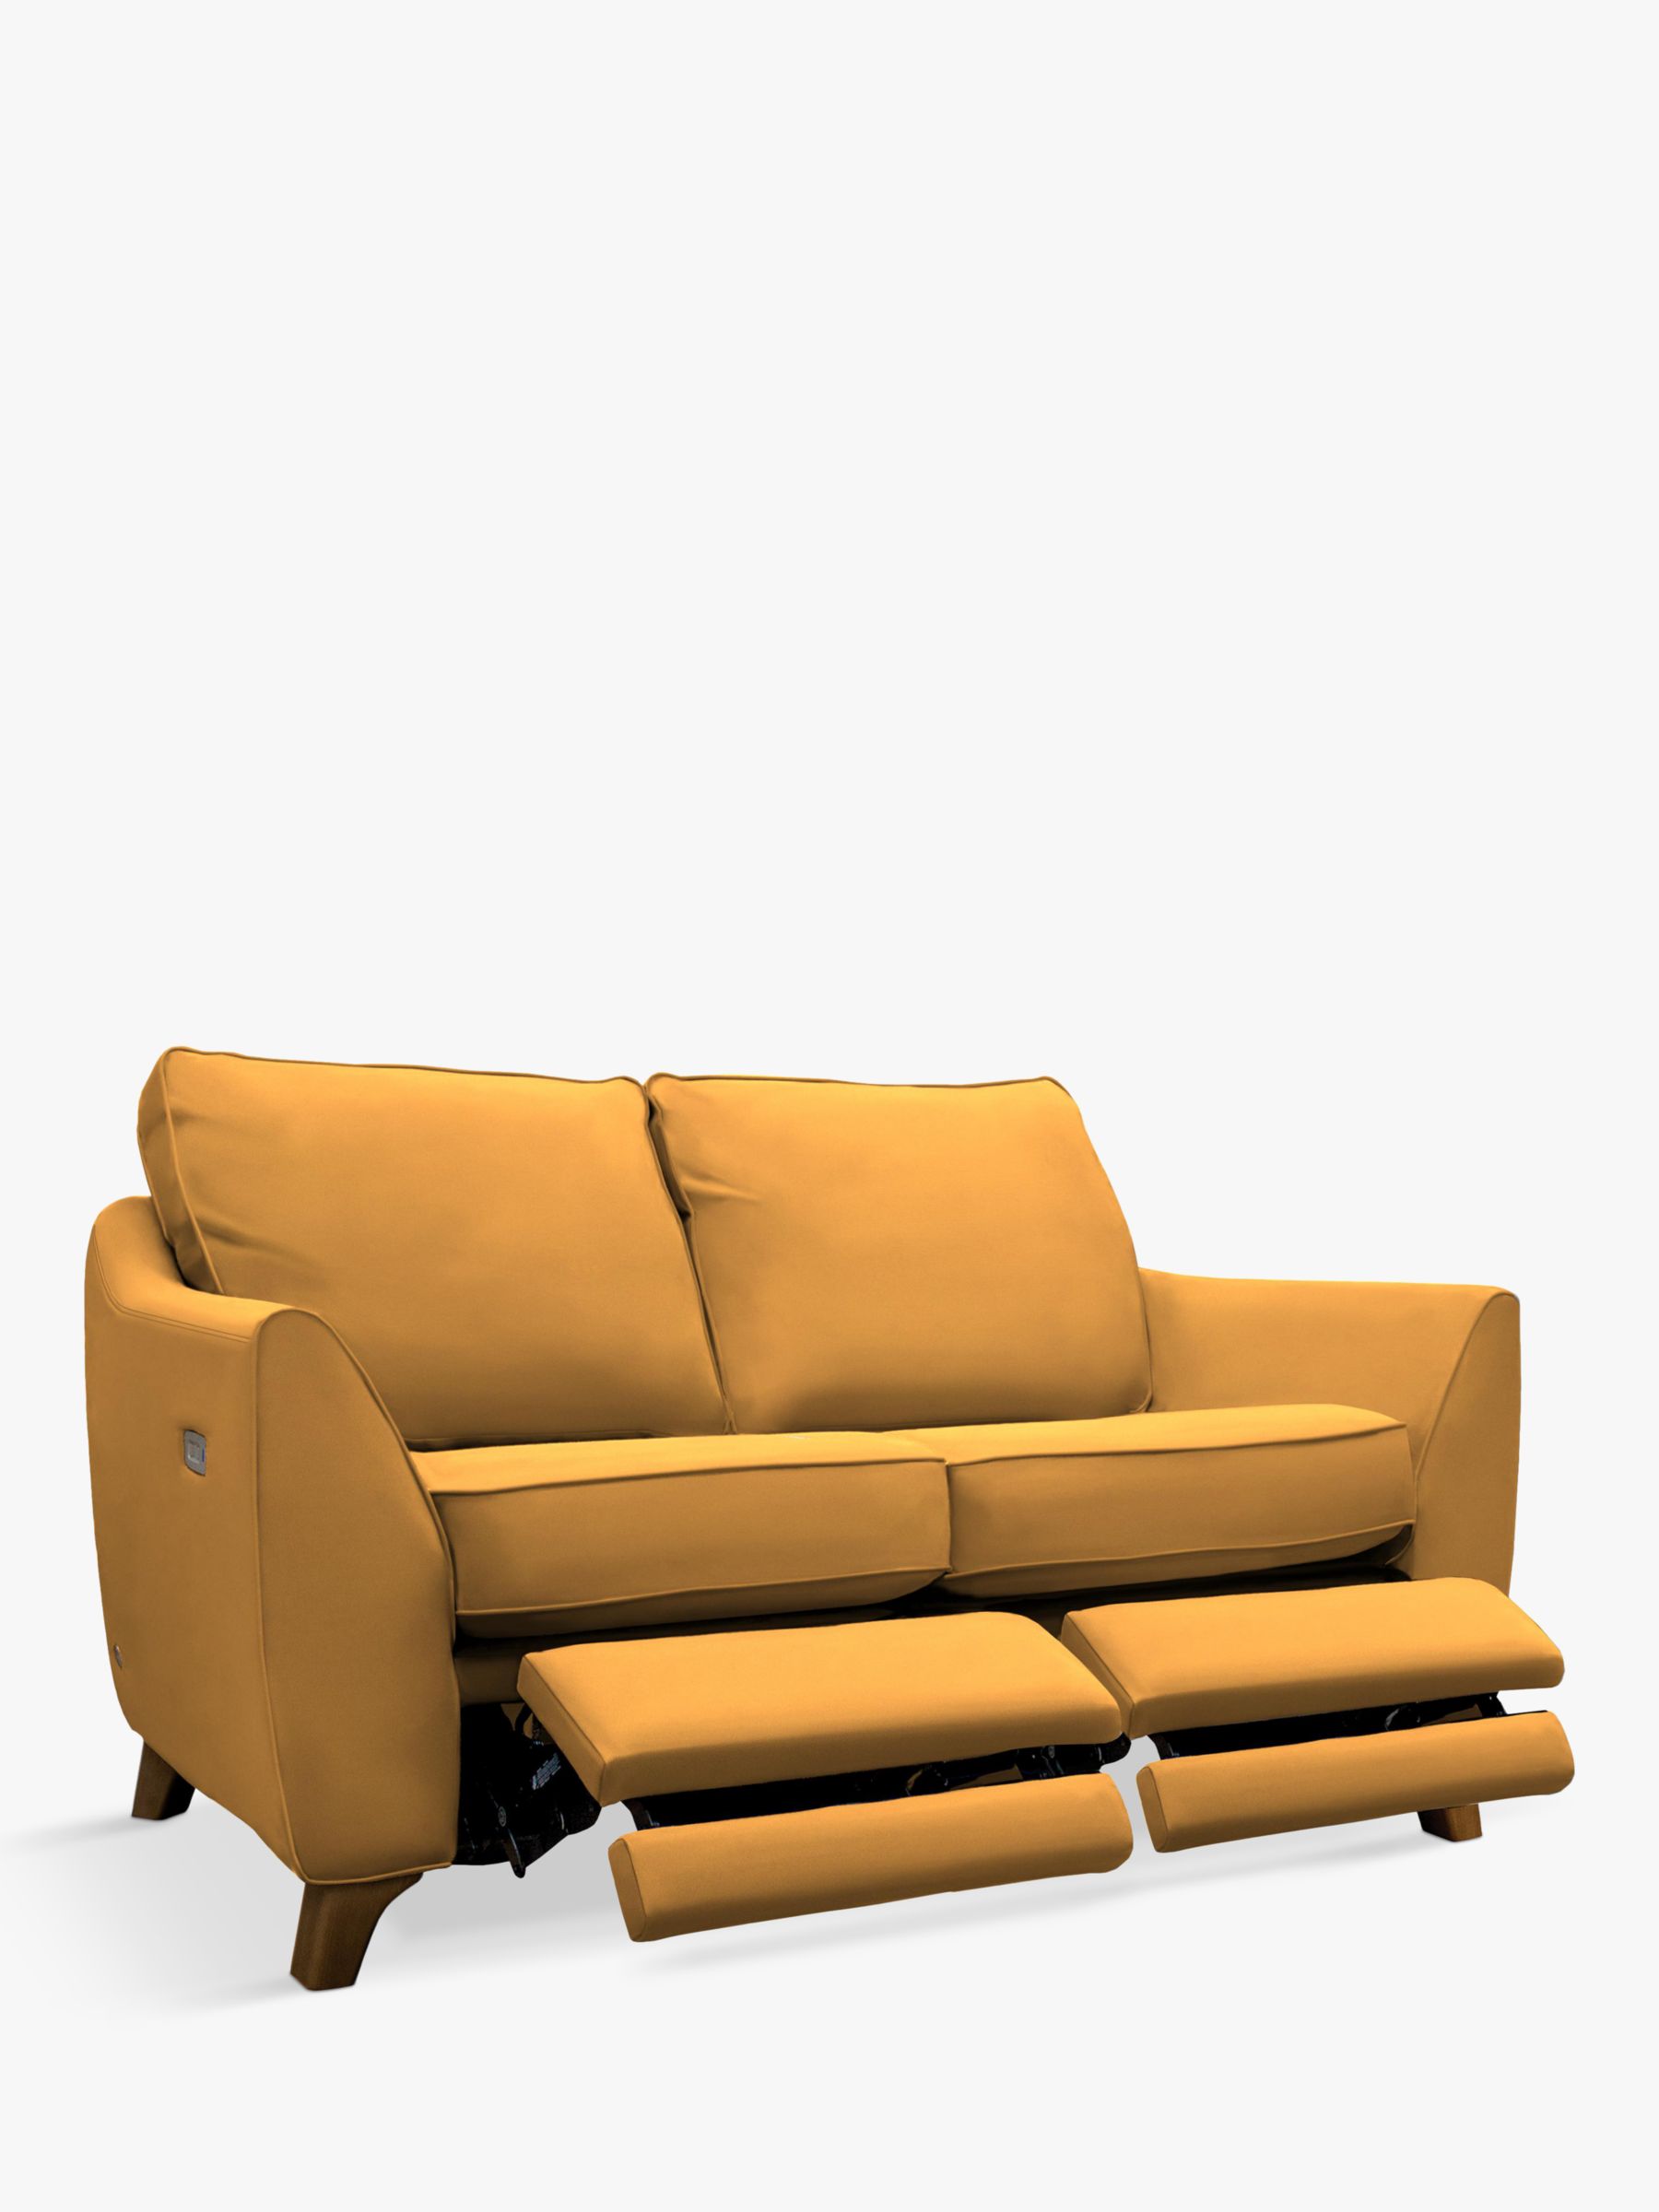 The Sixty Eight Range, G Plan Vintage The Sixty Eight Small 2 Seater Sofa with Double Footrest Mechanism, Plush Moss